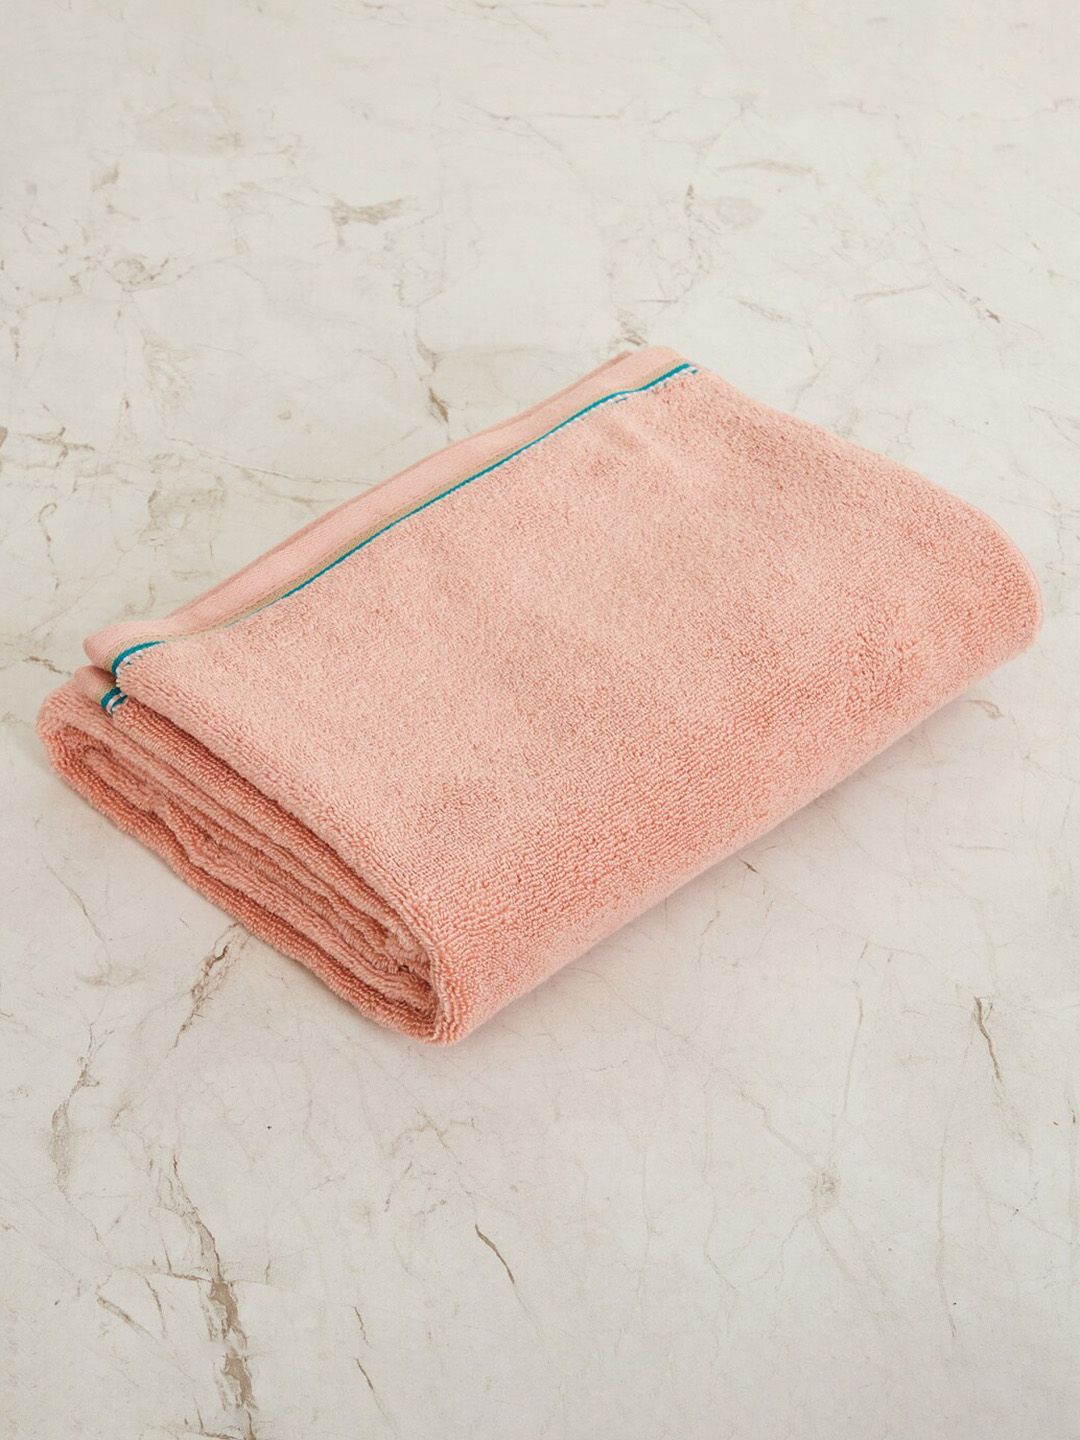 Home Centre Peach Colored Solid Cotton 110 GSM Bath Towel Price in India